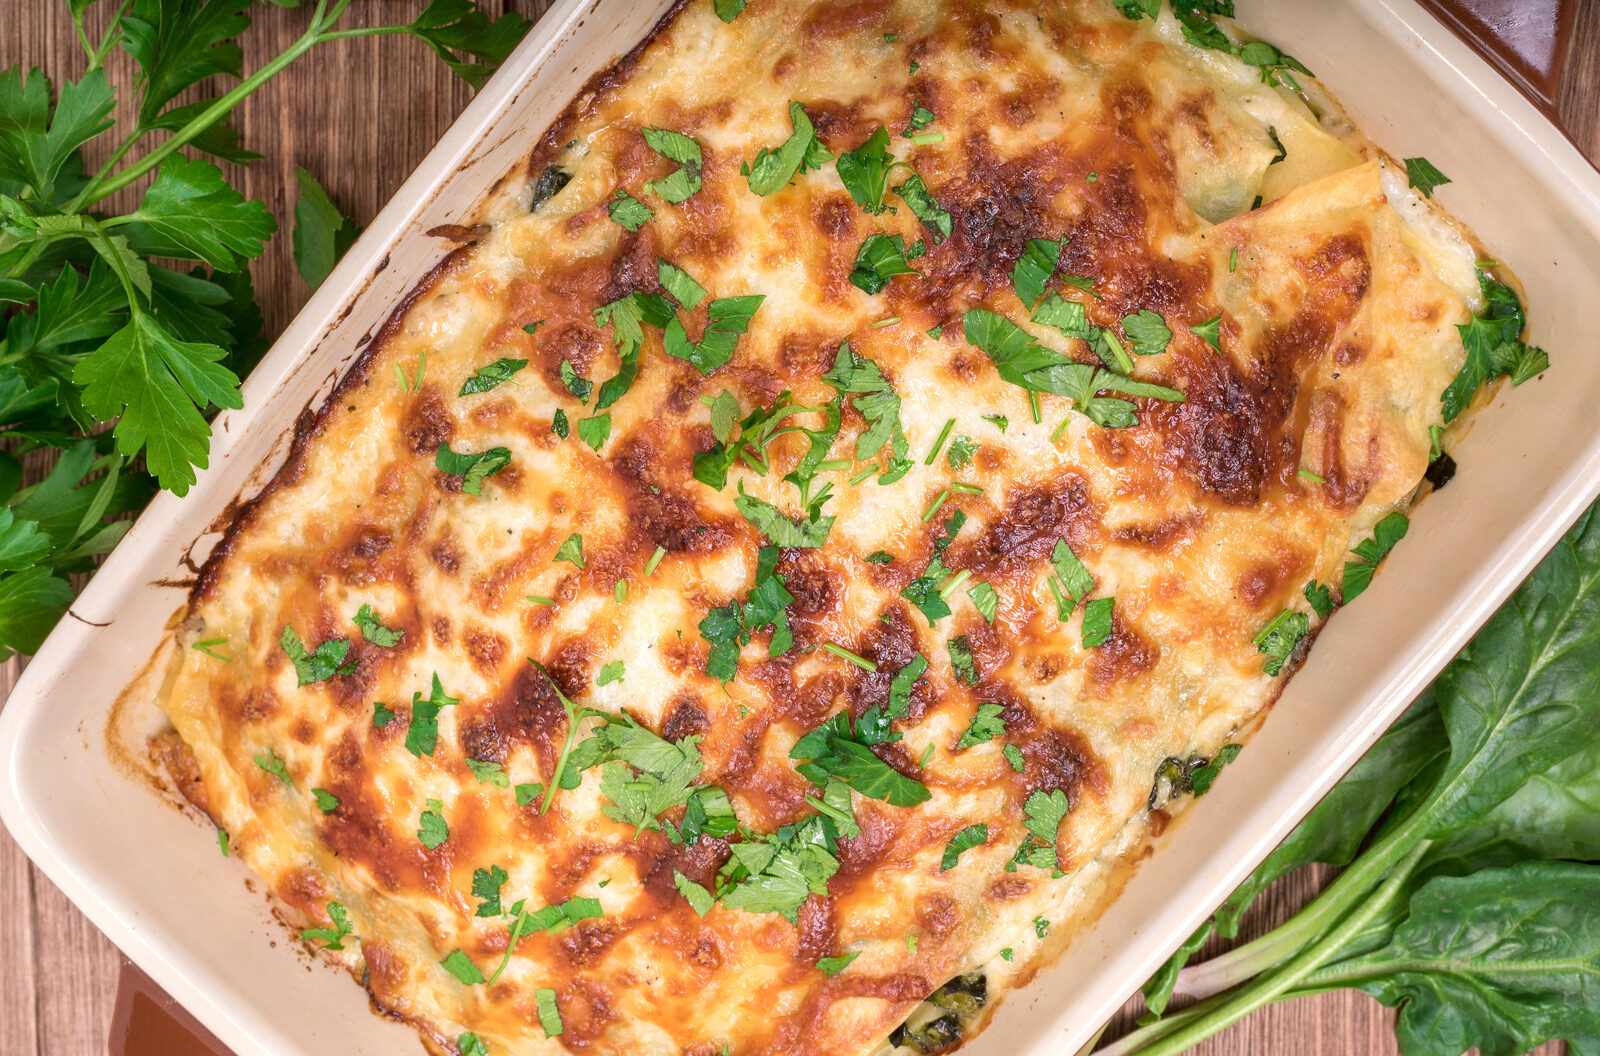 Million dollar chicken casserole topped with melted cheese and fresh parsley, presented in a rectangular ceramic dish, with raw spinach leaves beside it.